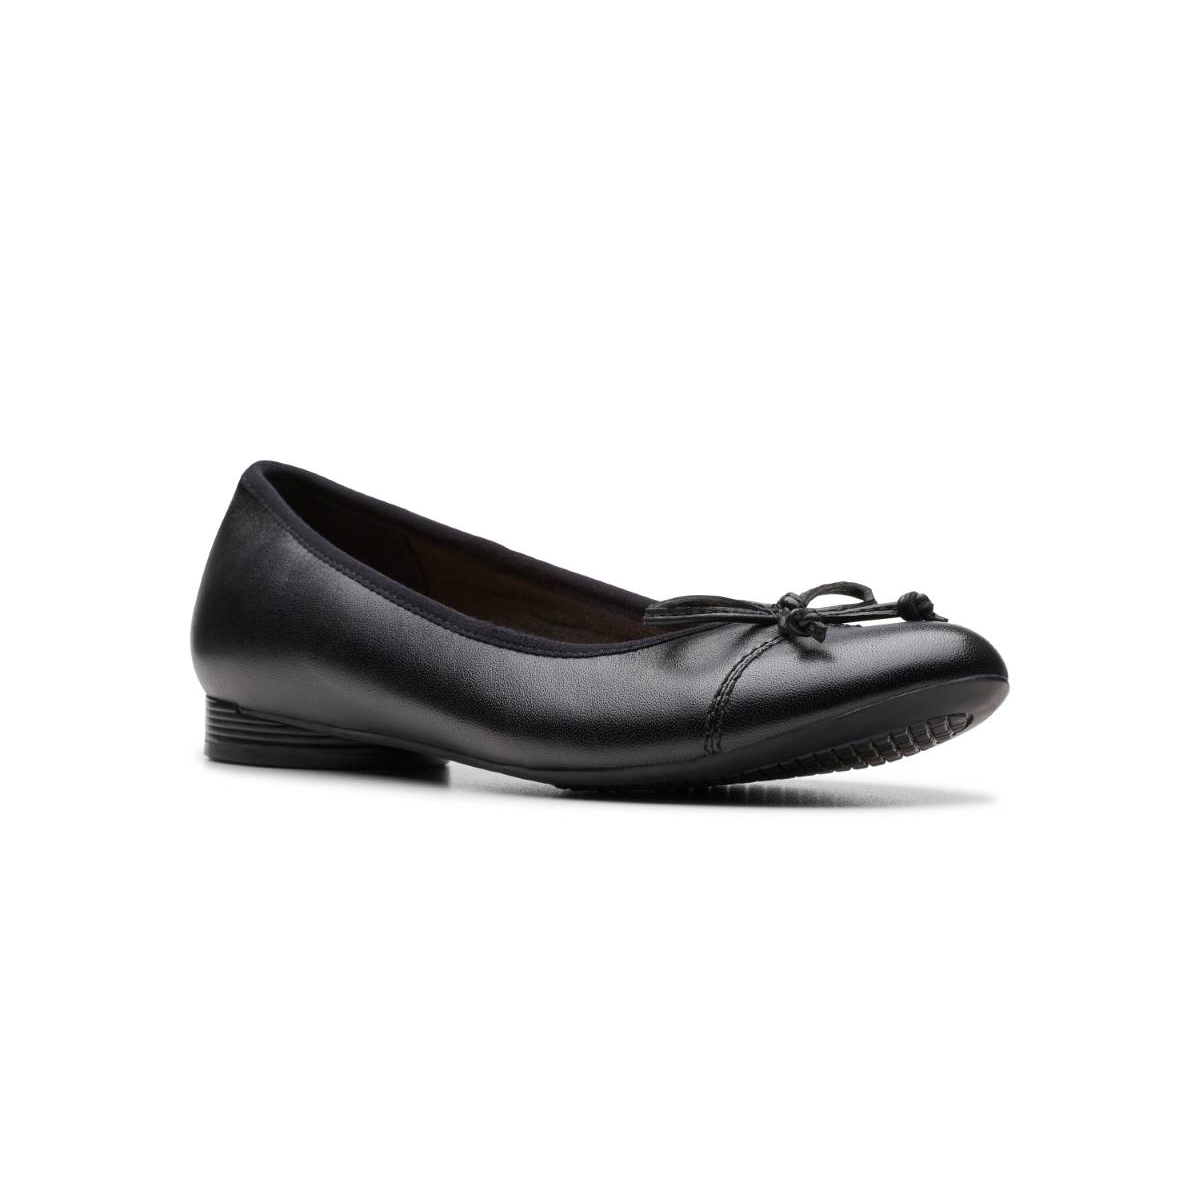 Clarks Loreleigh Rae Black leather Womens pumps 7735-34D in a Plain Leather in Size 5